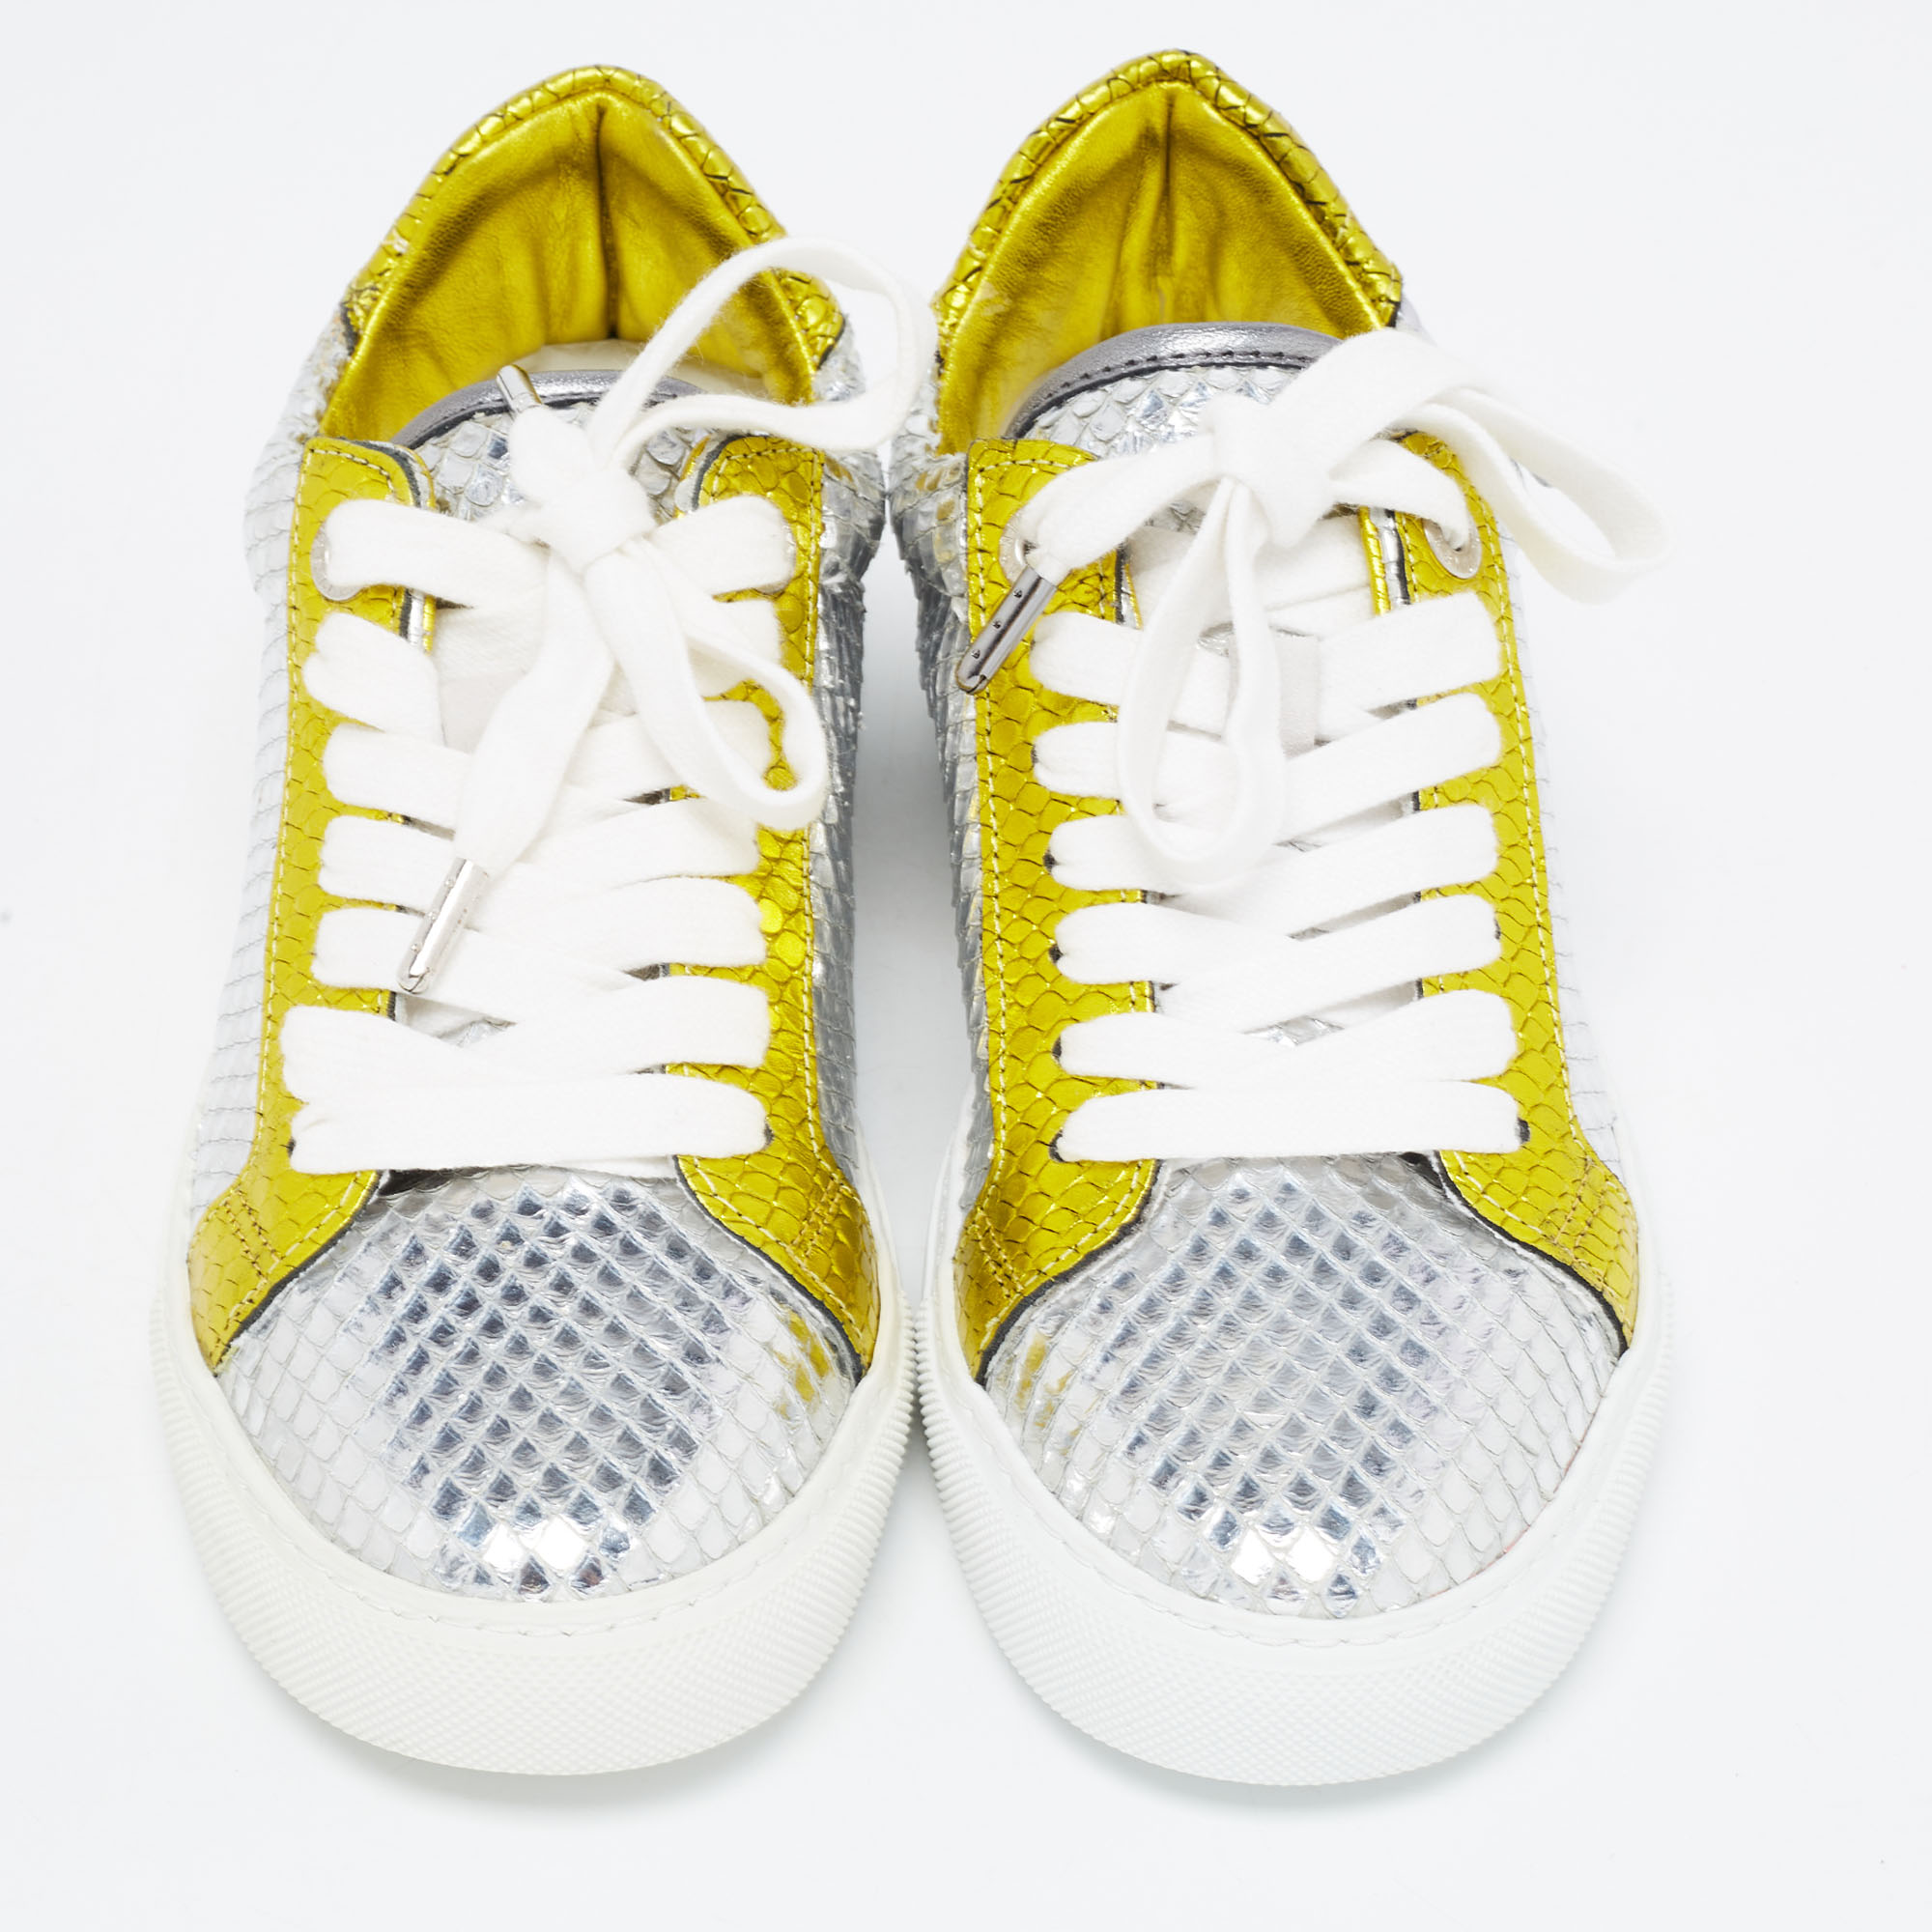 Zadig & Voltaire Silver/Gold Python Embossed Leather Low Top Sneakers Size 36